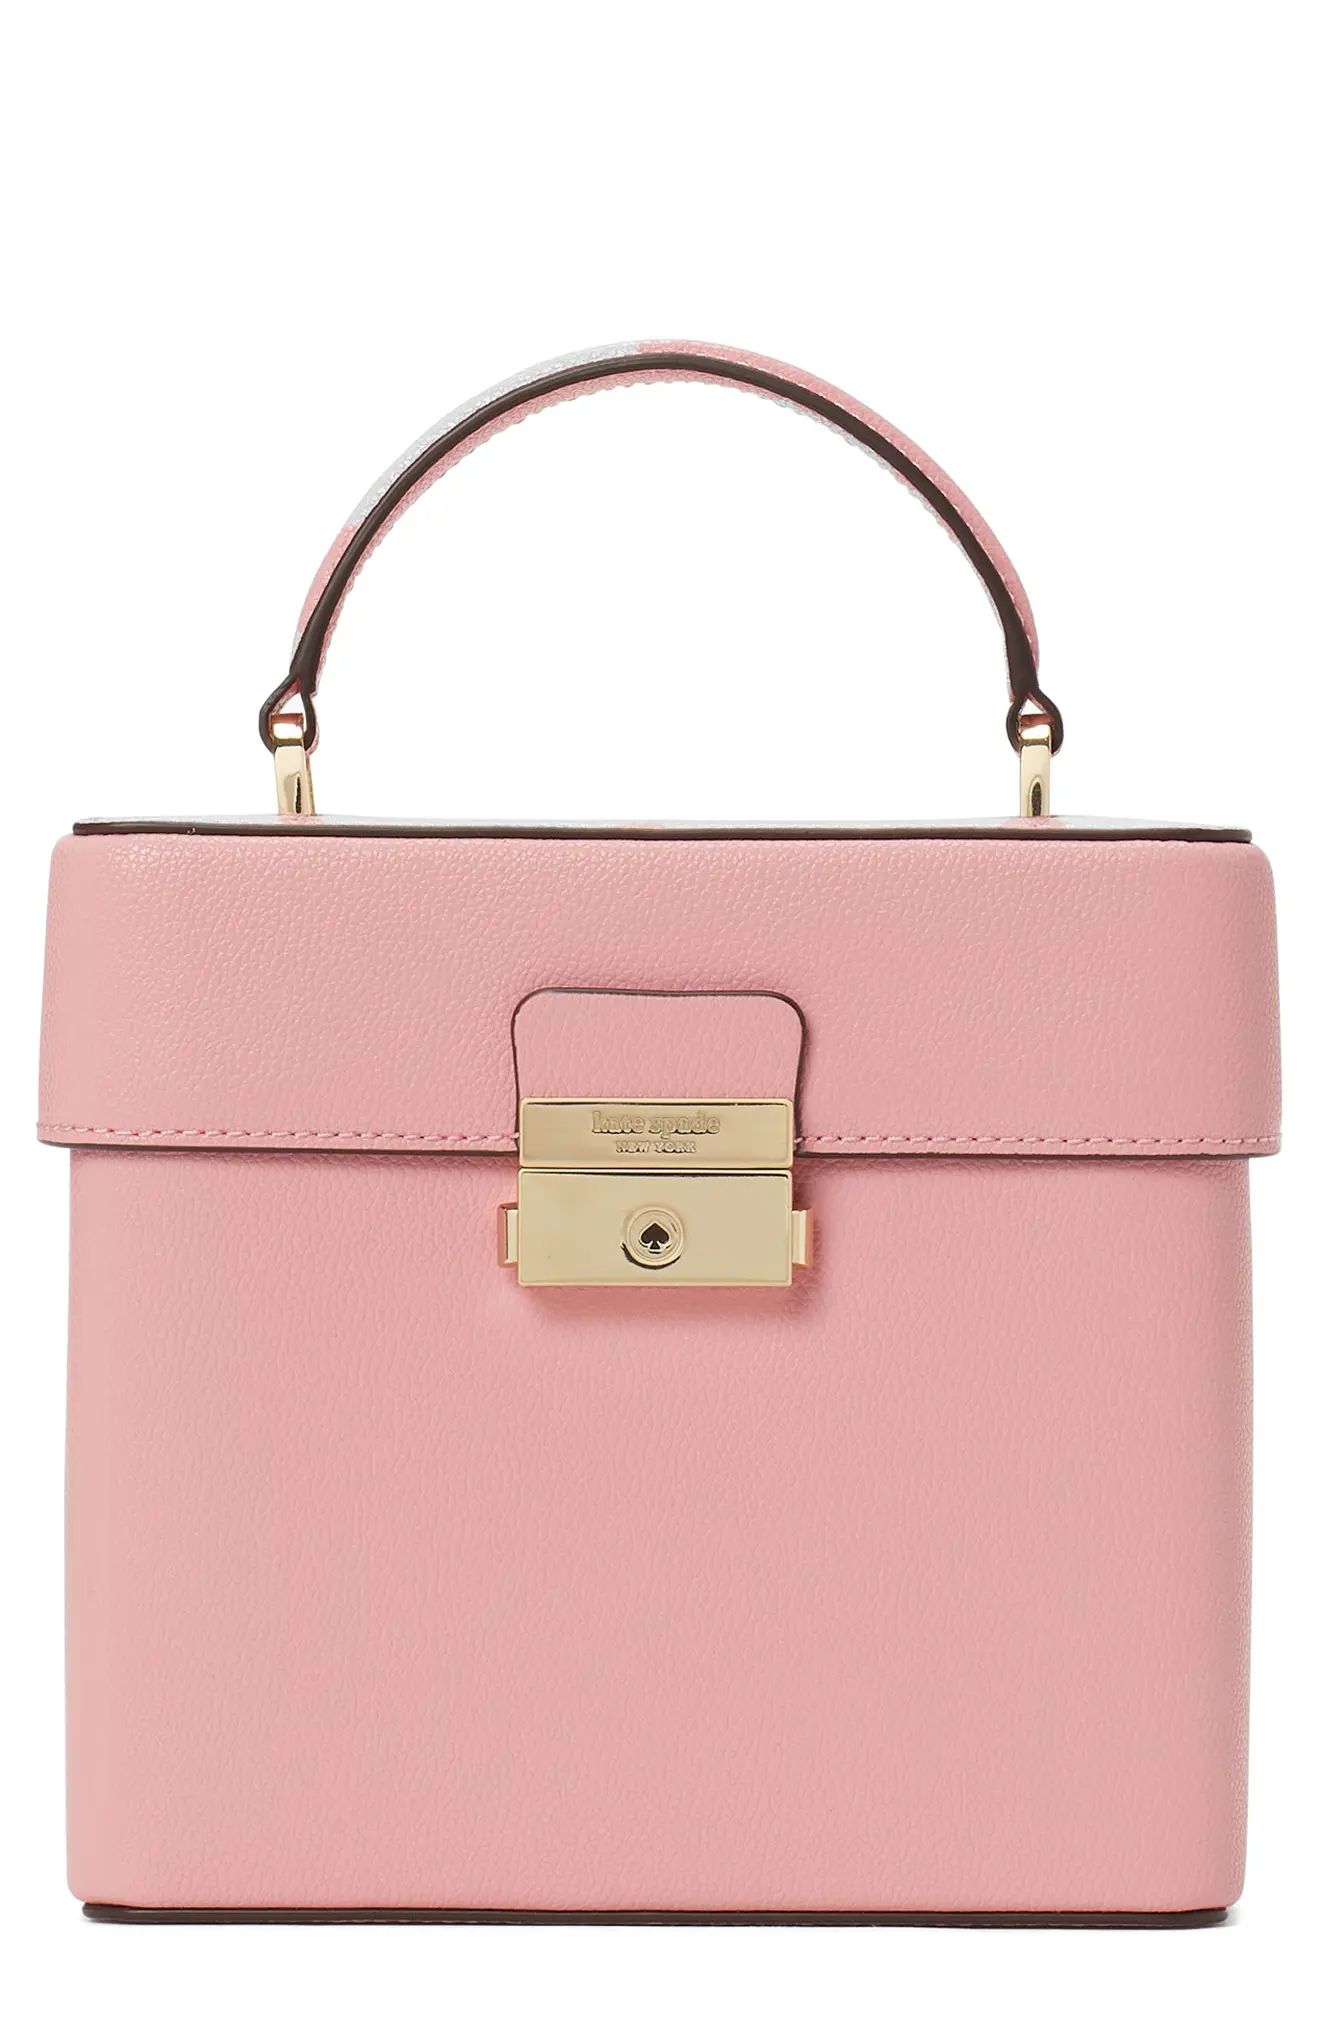 kate spade new york voyage small leather crossbody bag in Pink Sugar at Nordstrom | Nordstrom